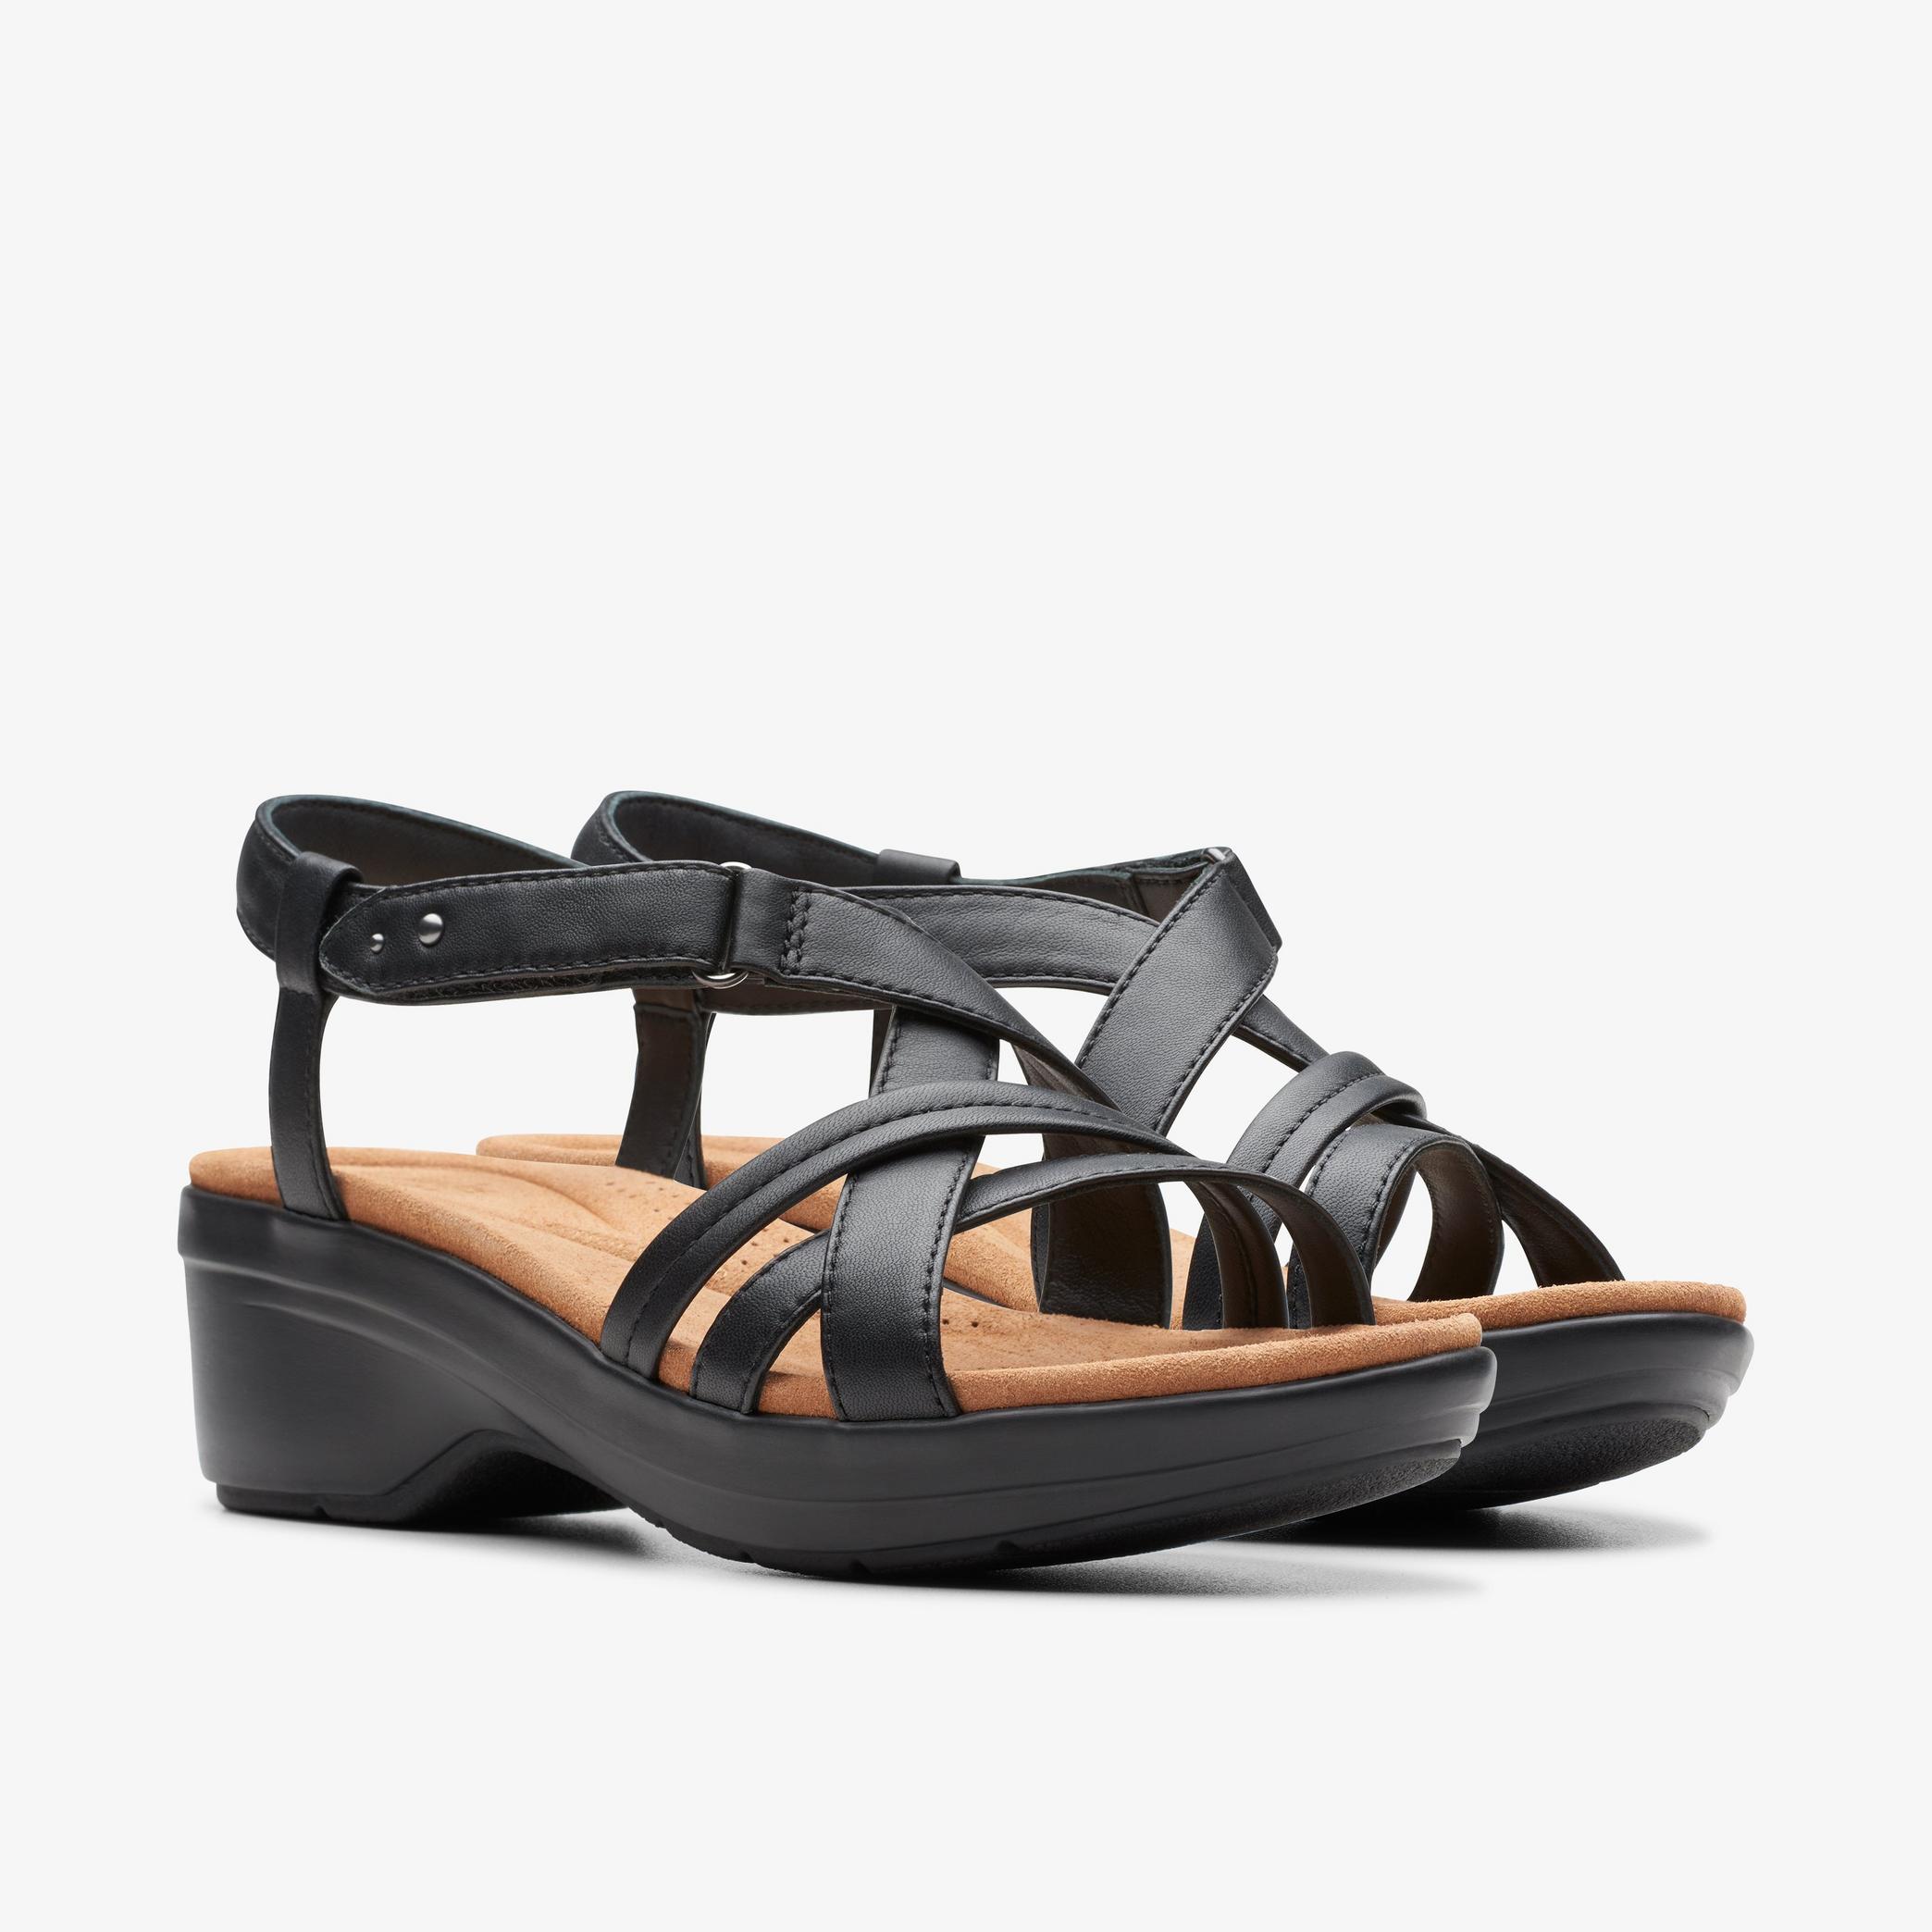 Tuleah May Black Leather Heeled Sandals, view 4 of 6